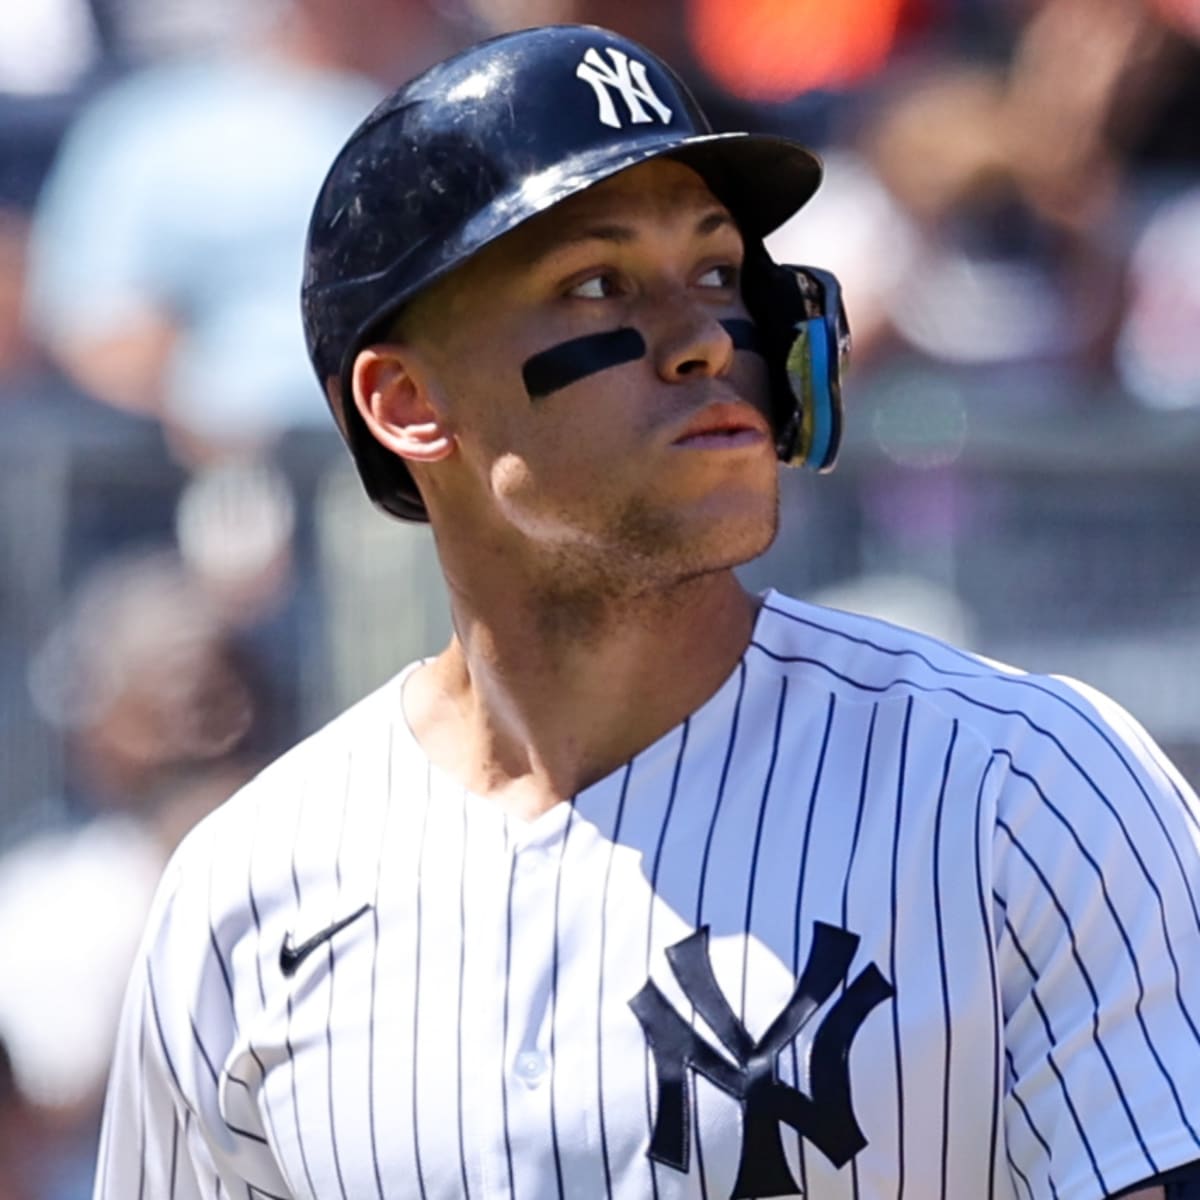 Aaron Judge opens 2023 campaign against Giants after rejecting San